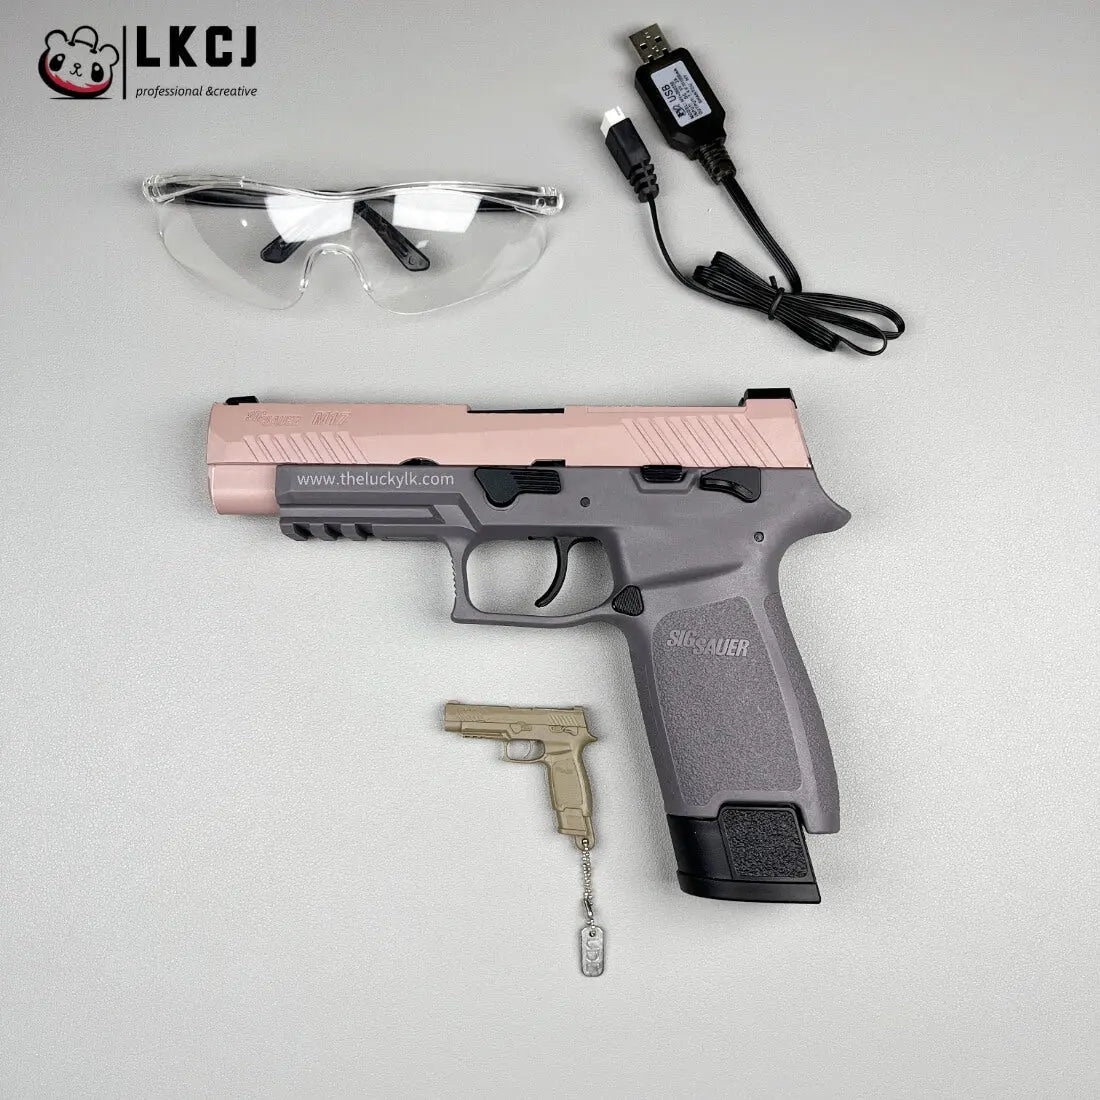 New Electric P320(M17) & D'eagle Gel Blaster Recommended age 18+ LKCJ